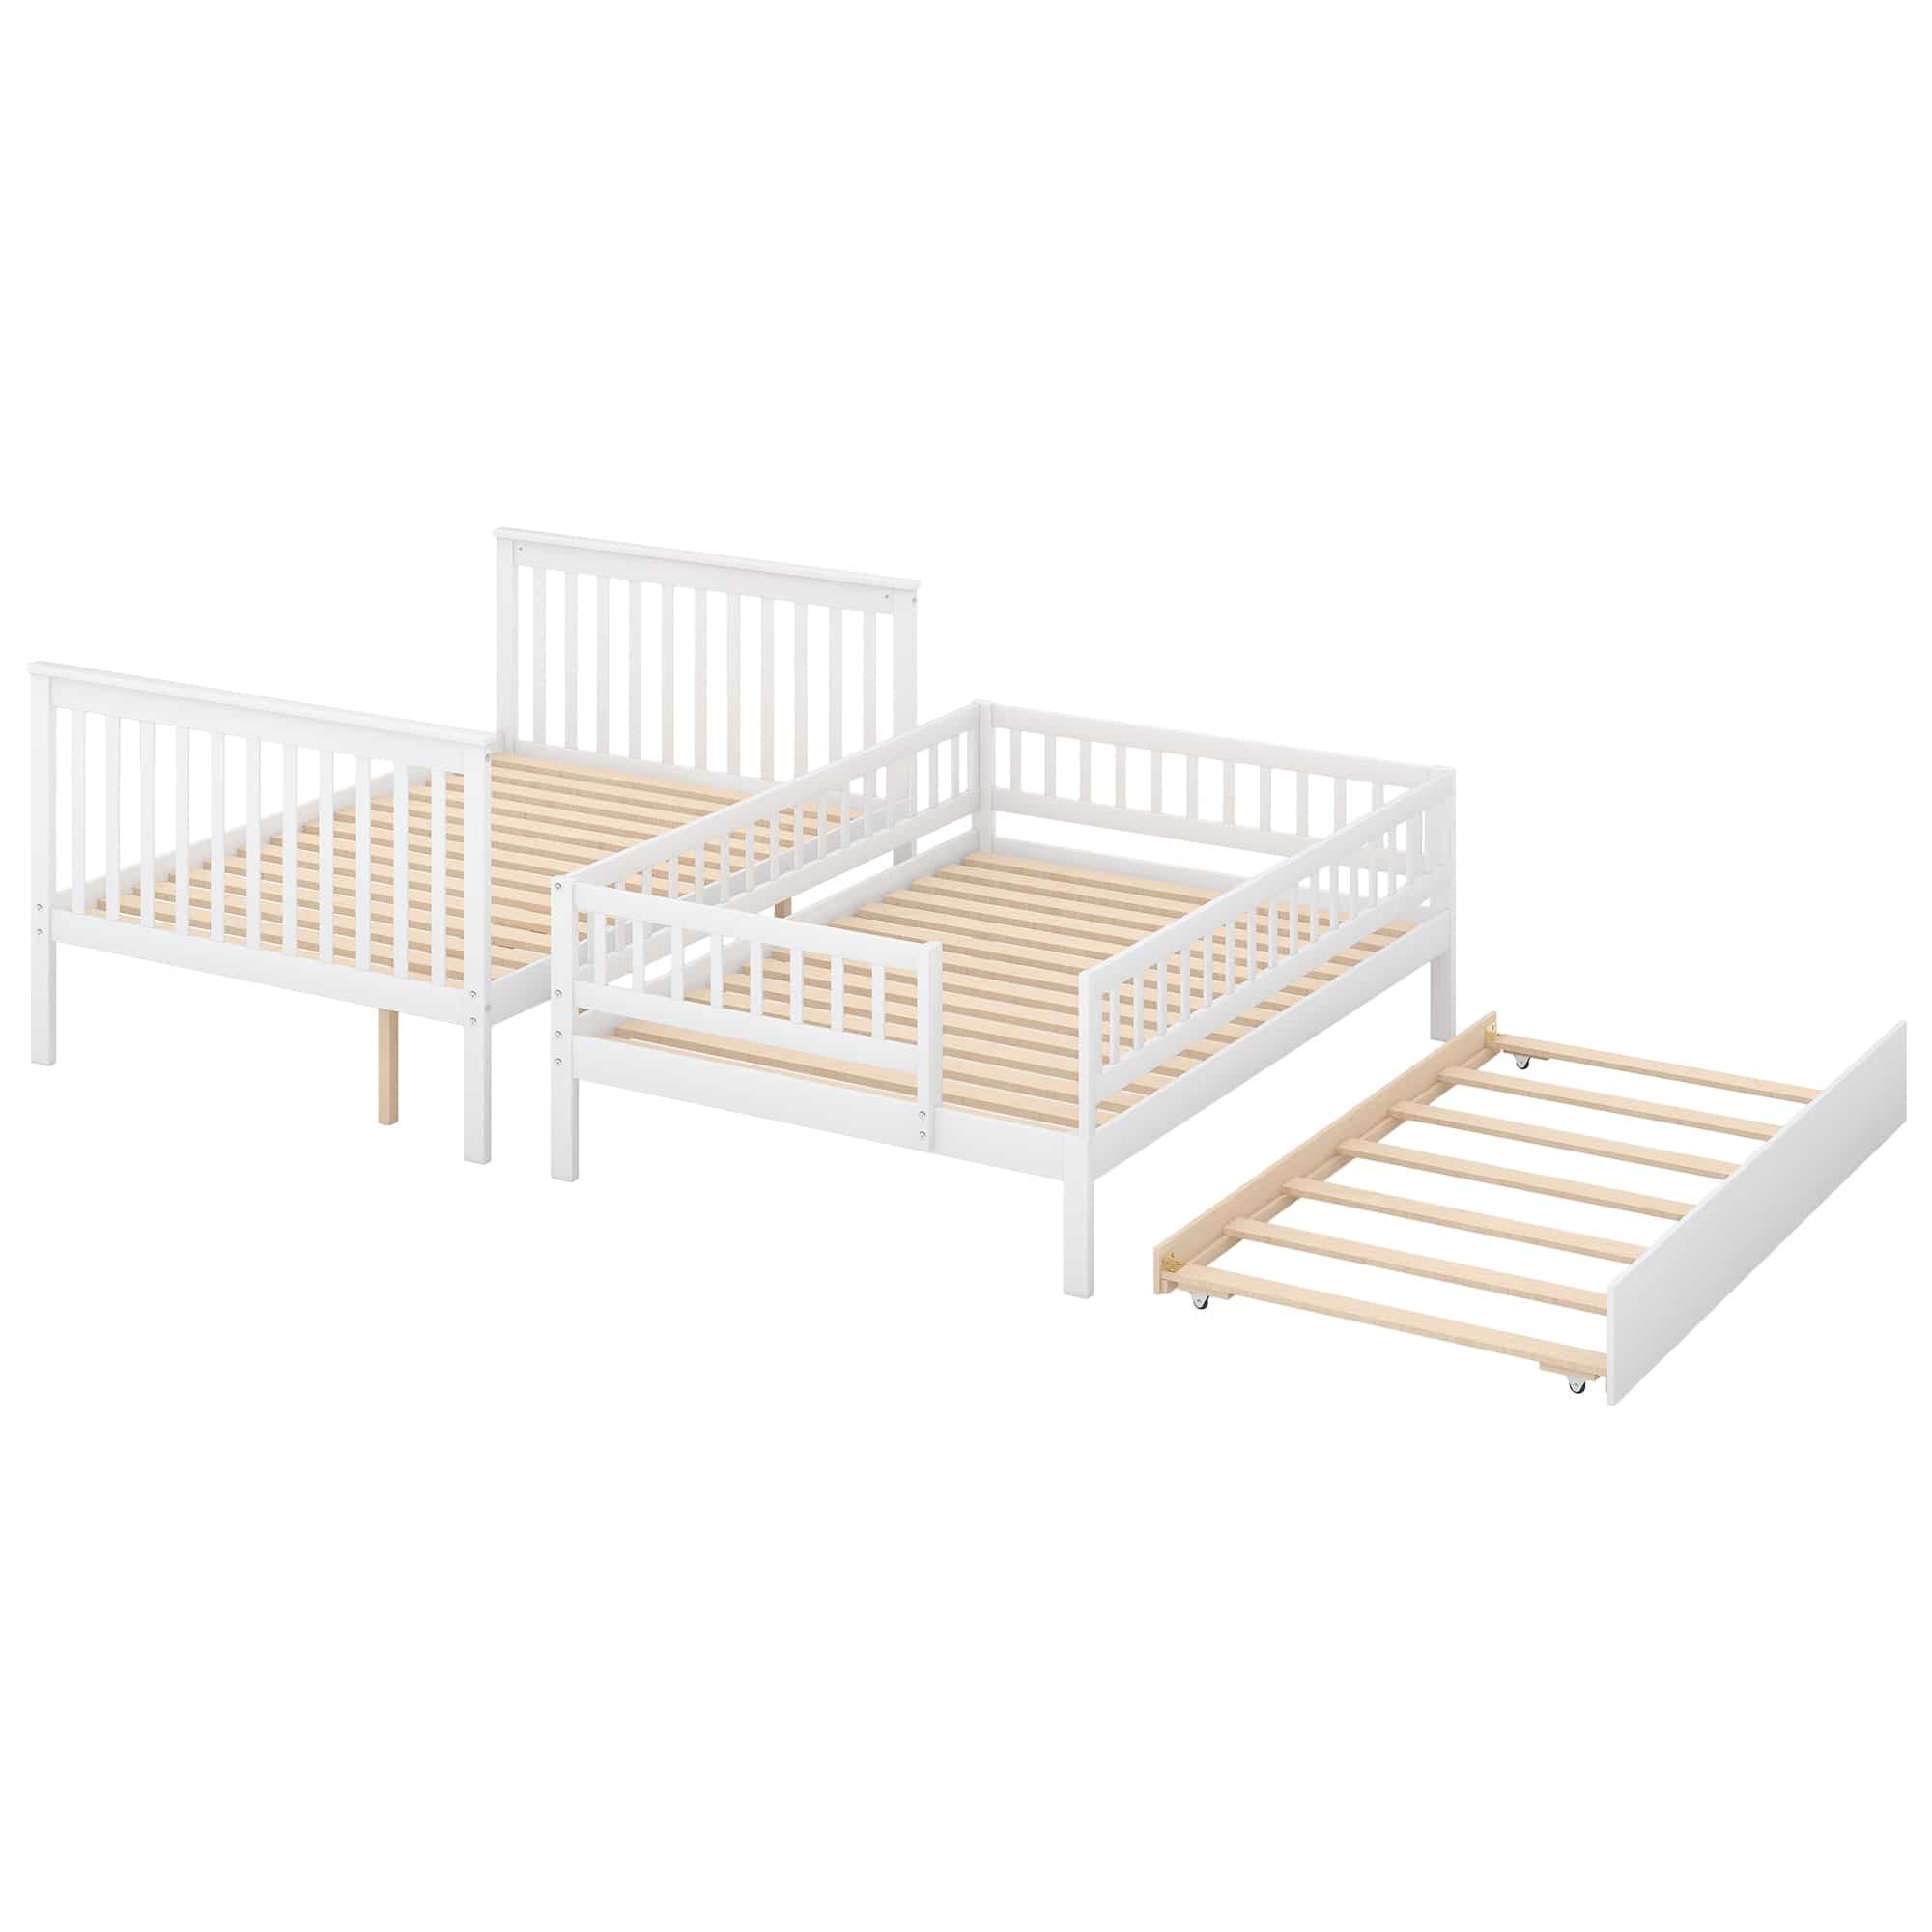 Pine wood+MDF Optimize Storage Spac Full over Full Bunk Bed with Trundle and Staircase.